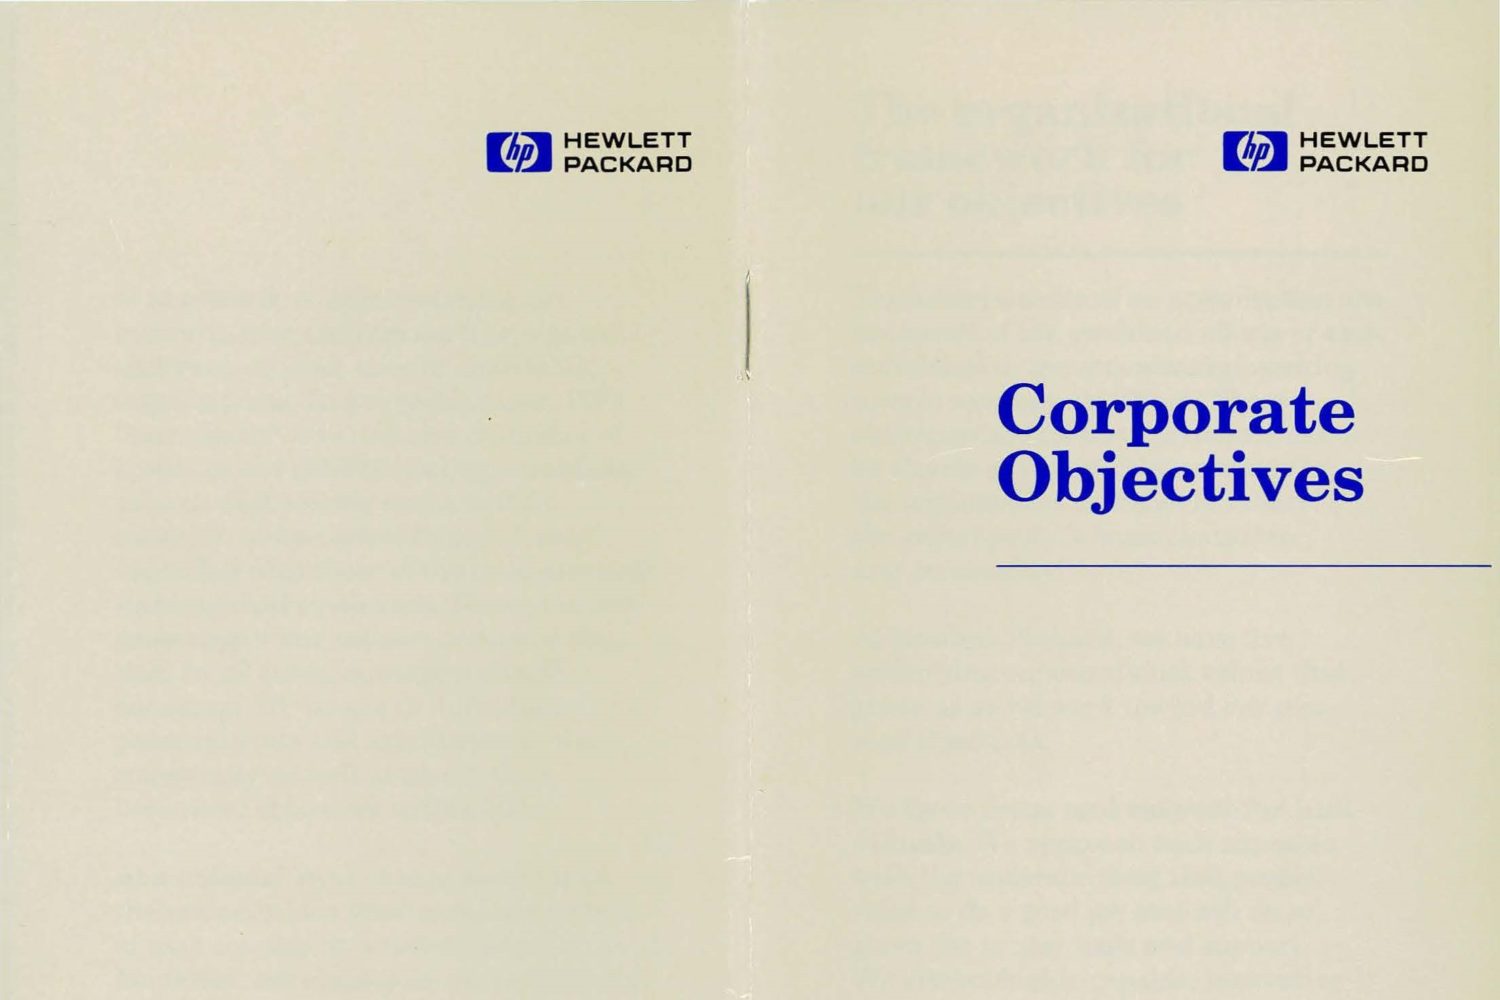 The 1989 HP Corporate Objectives document.